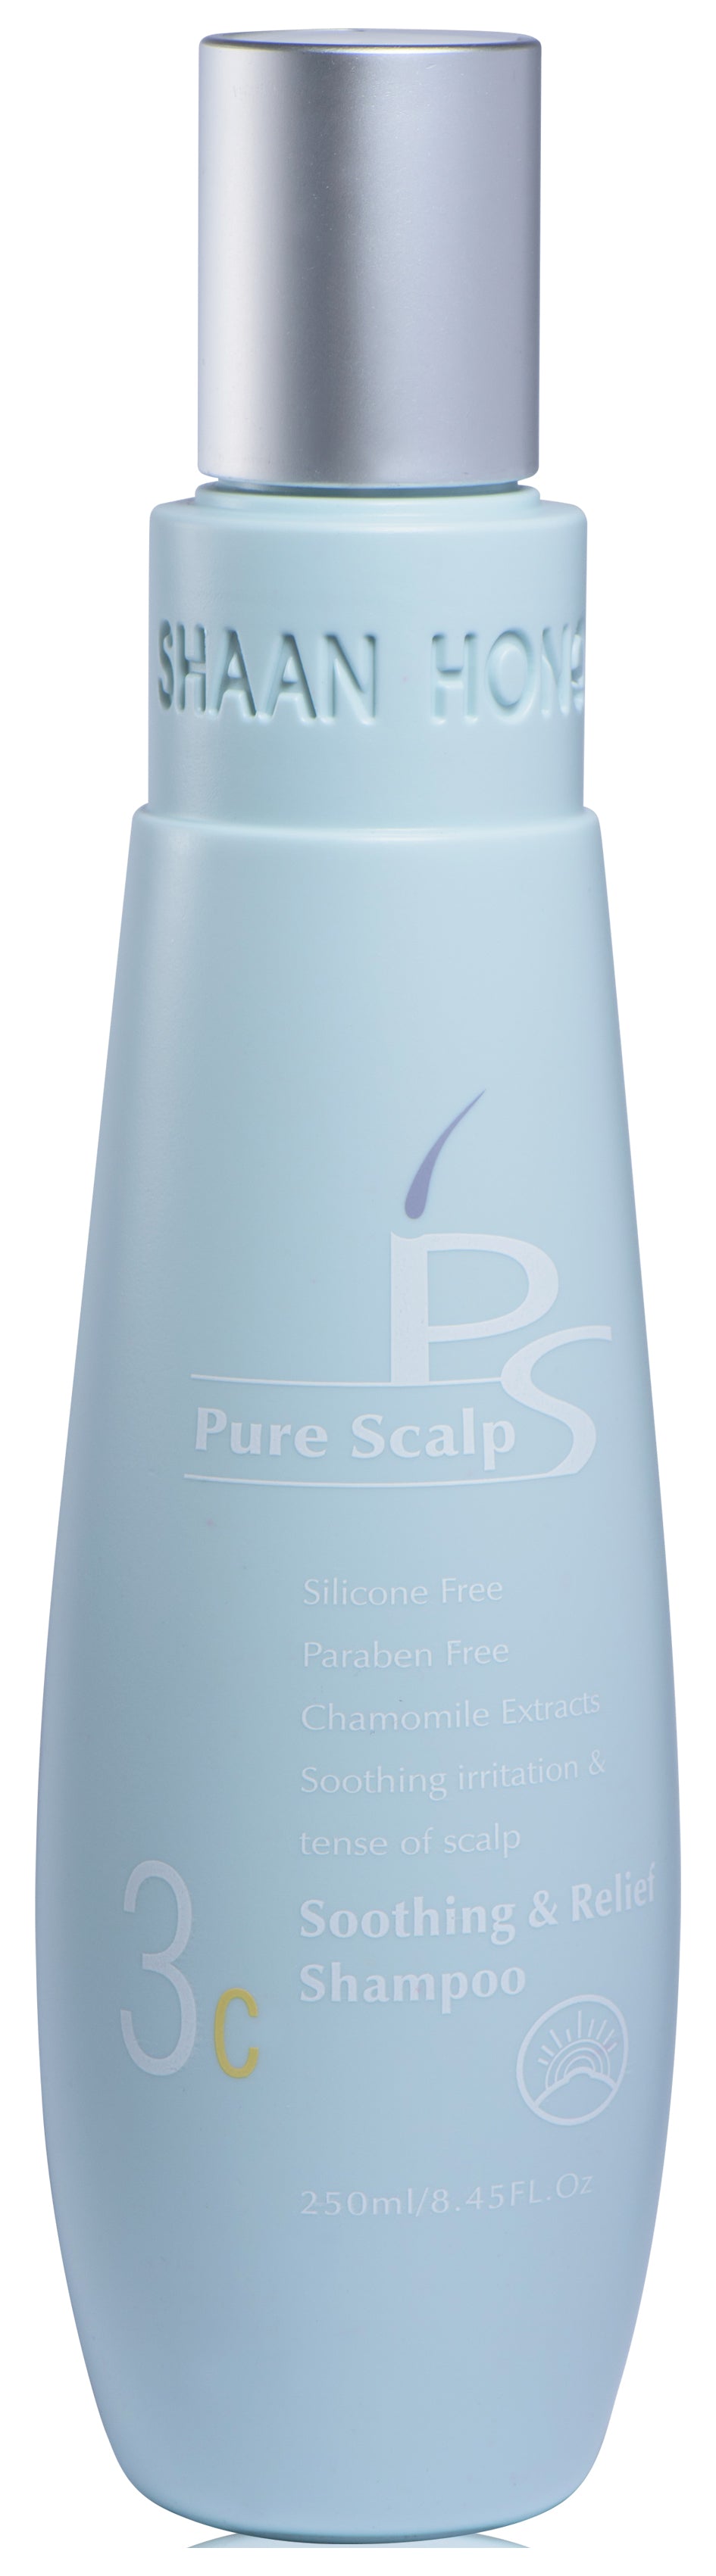 Pure Scalp (3c) Soothing & Relief Shampoo 250ML